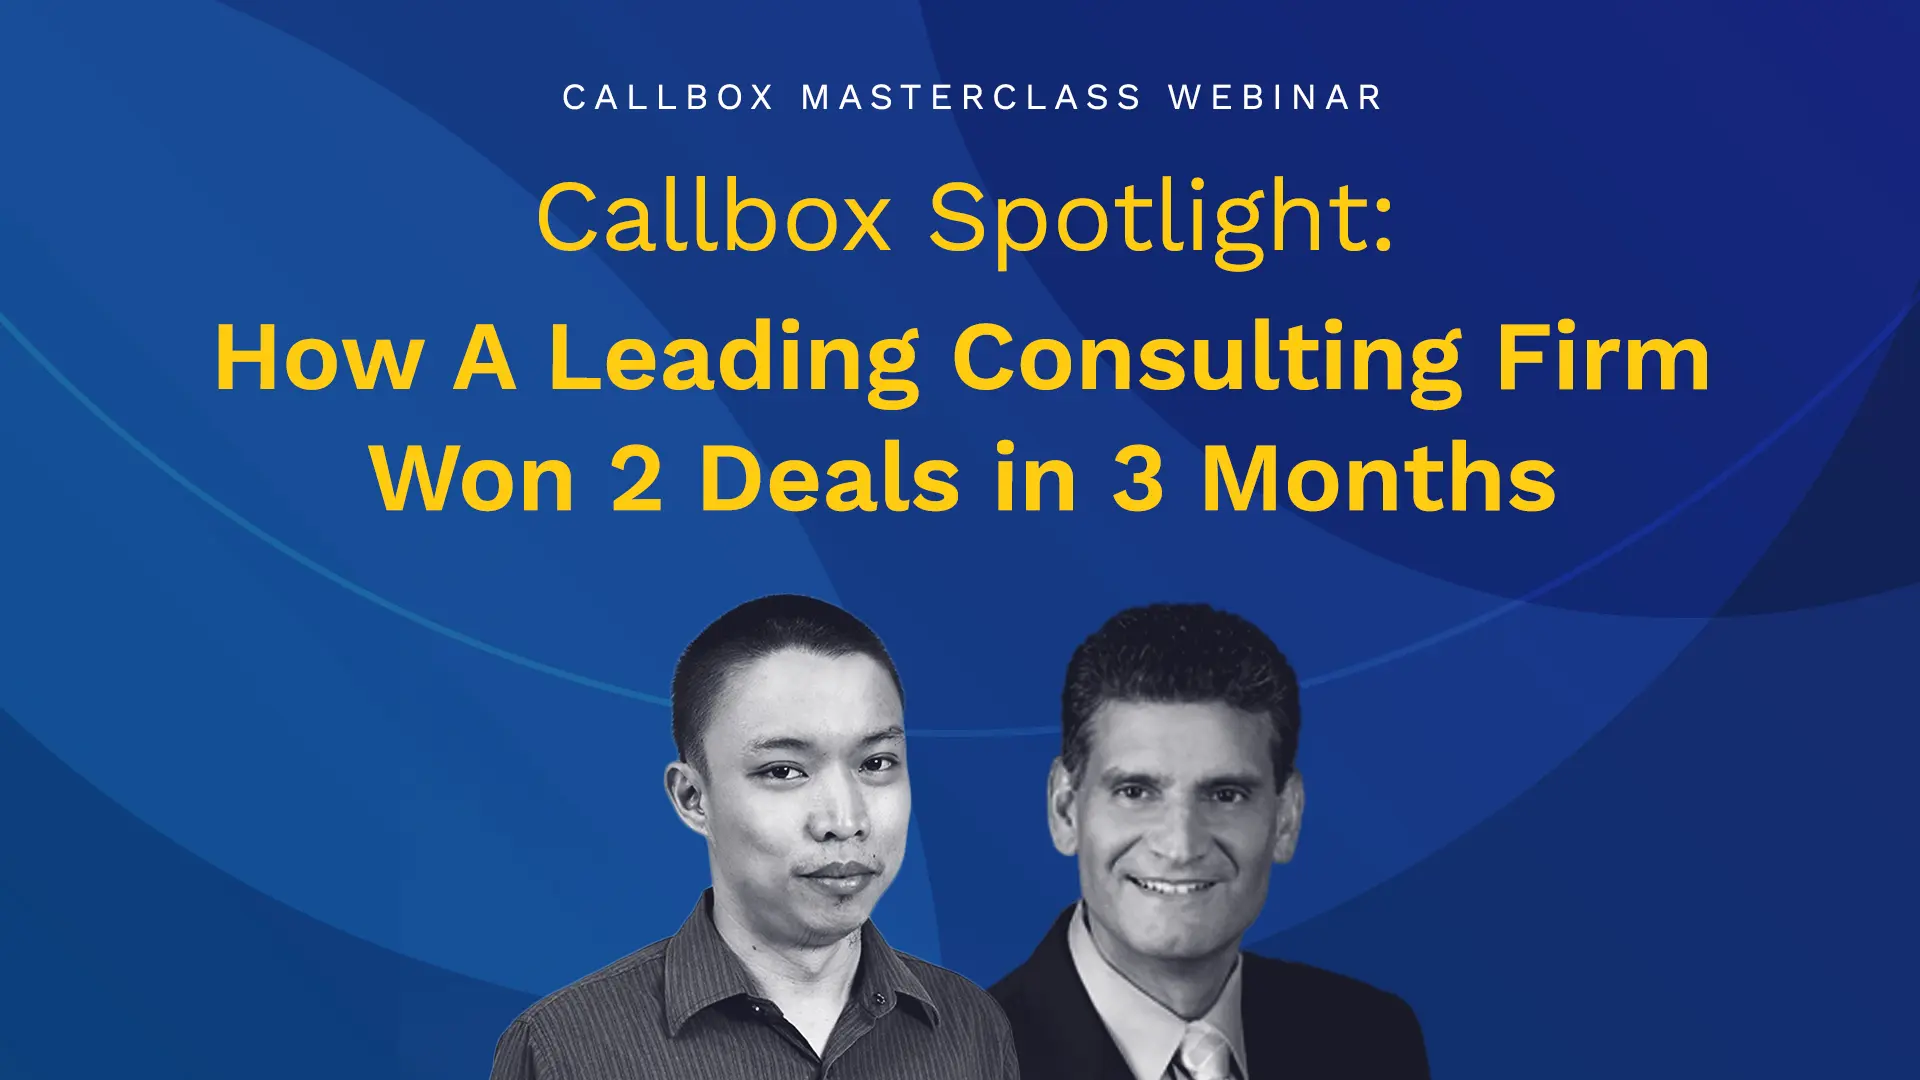 Callbox Spotlight: How A Leading Consulting Firm Won 2 Deals in 3 Months